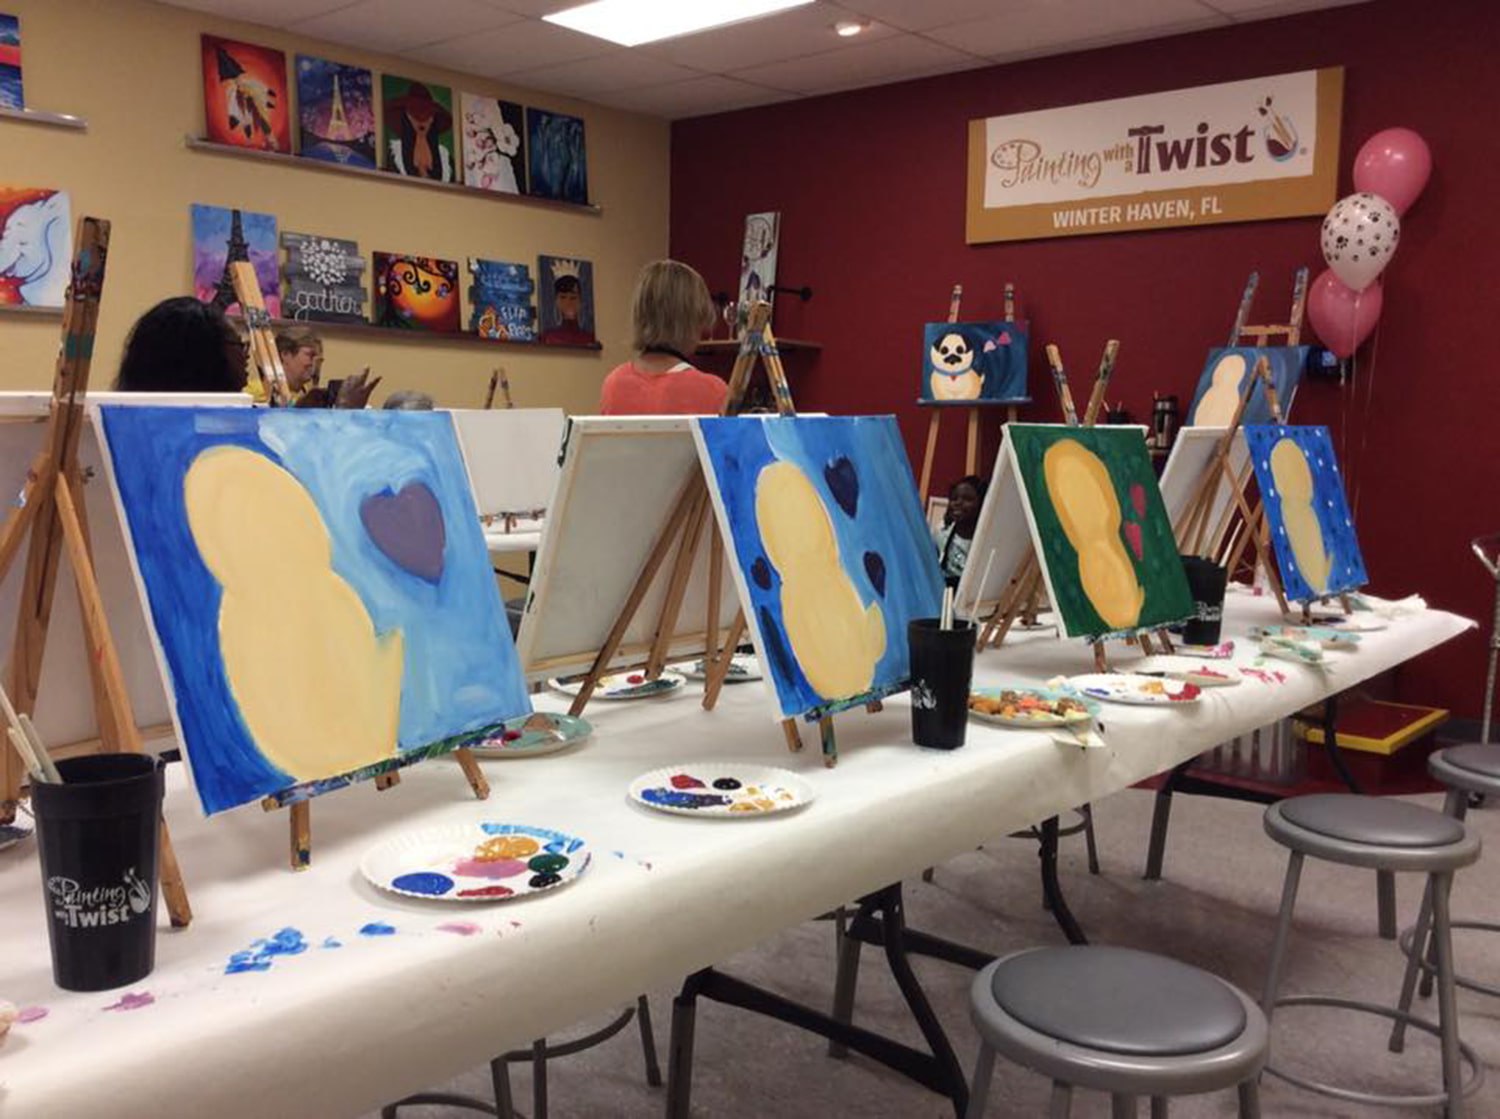 Participant paintings on table during class at Painting with a Twist in Winter Haven, FL